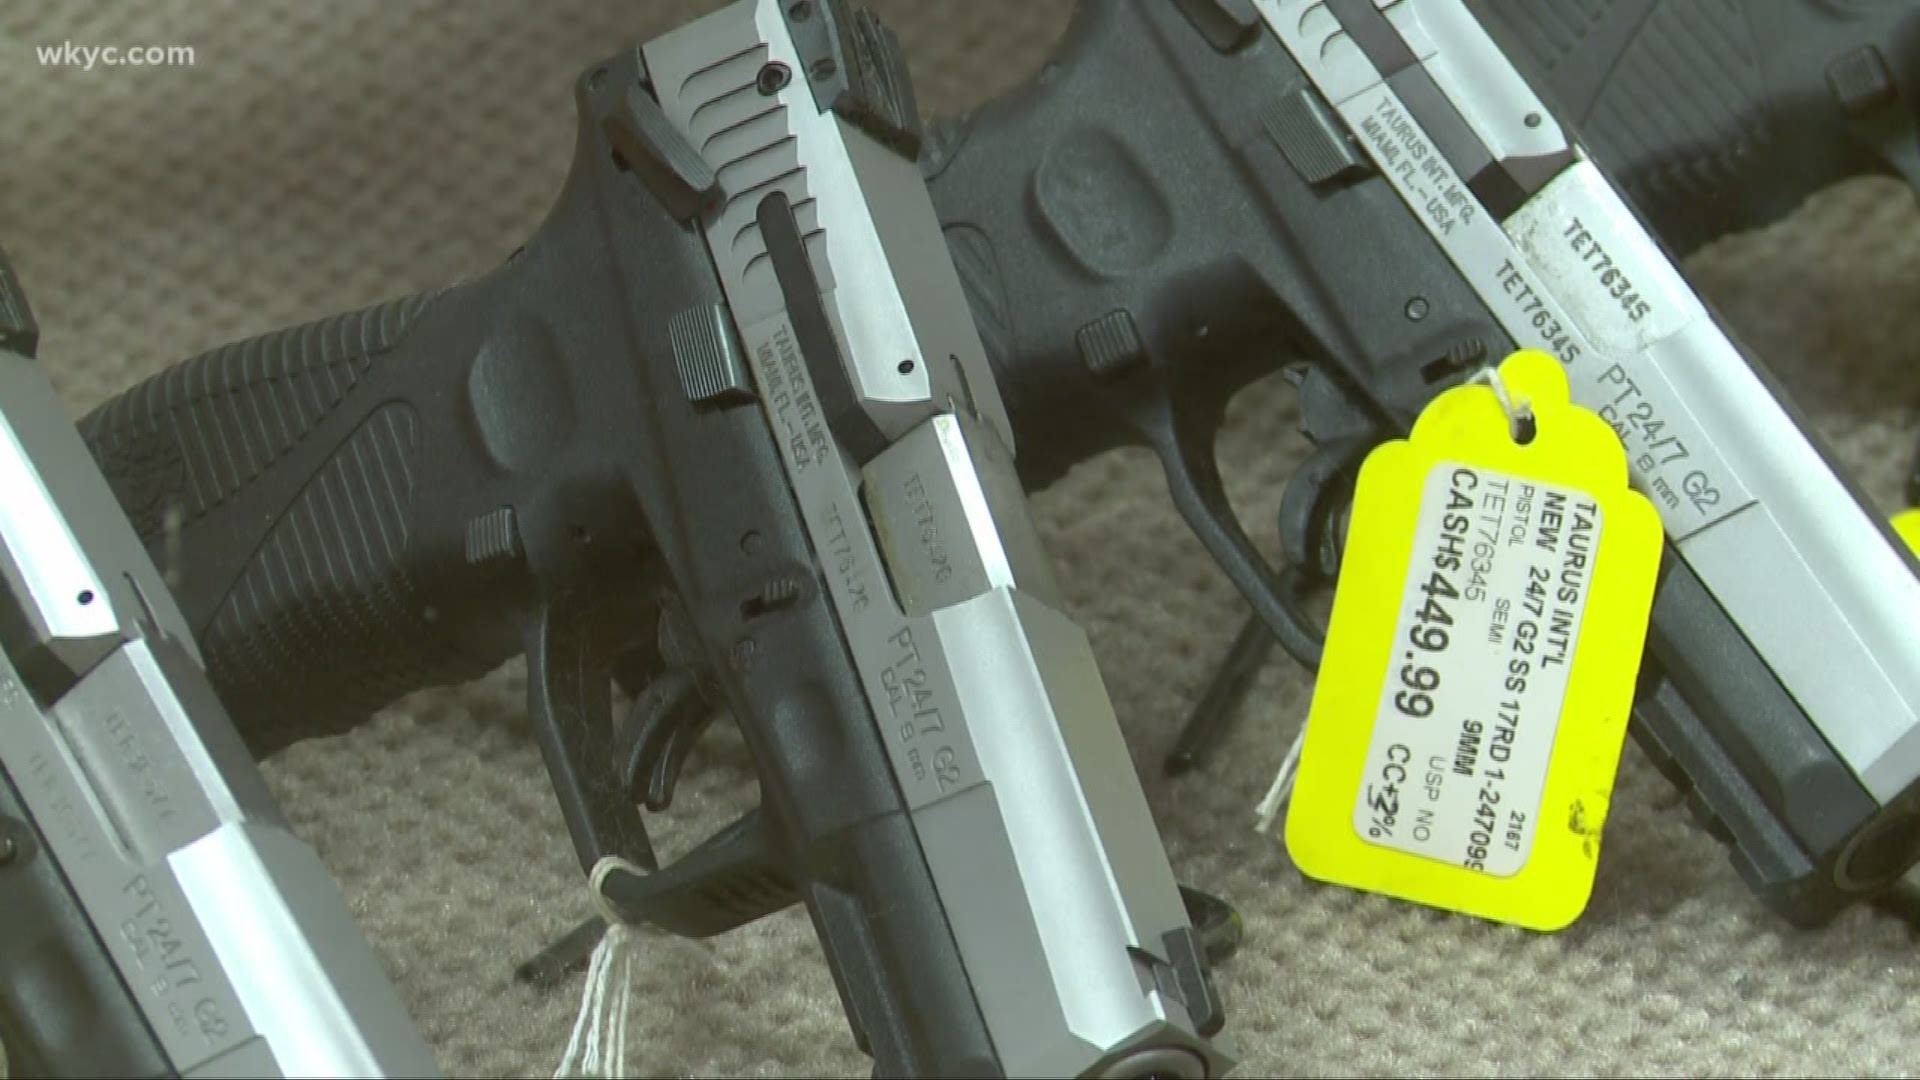 Bill introduced in Ohio House would make it legal to conceal and carry without a permit